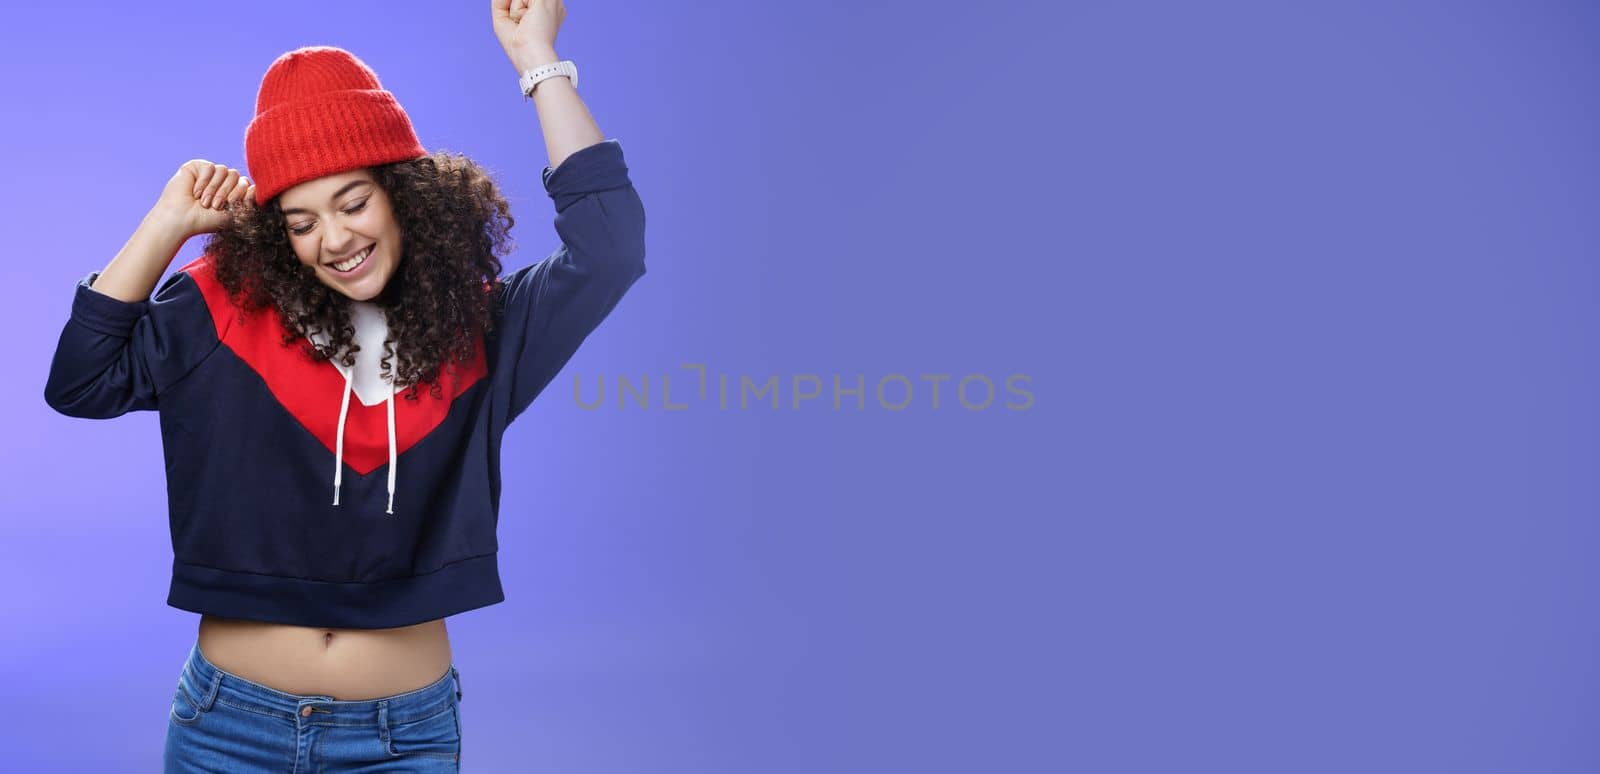 Girl celebrating favorite season in year. Portrait of carefree and joyful dancing woman with curly hair in cute red hat lifting hands in dance movements smiling enjoying music and holidays.